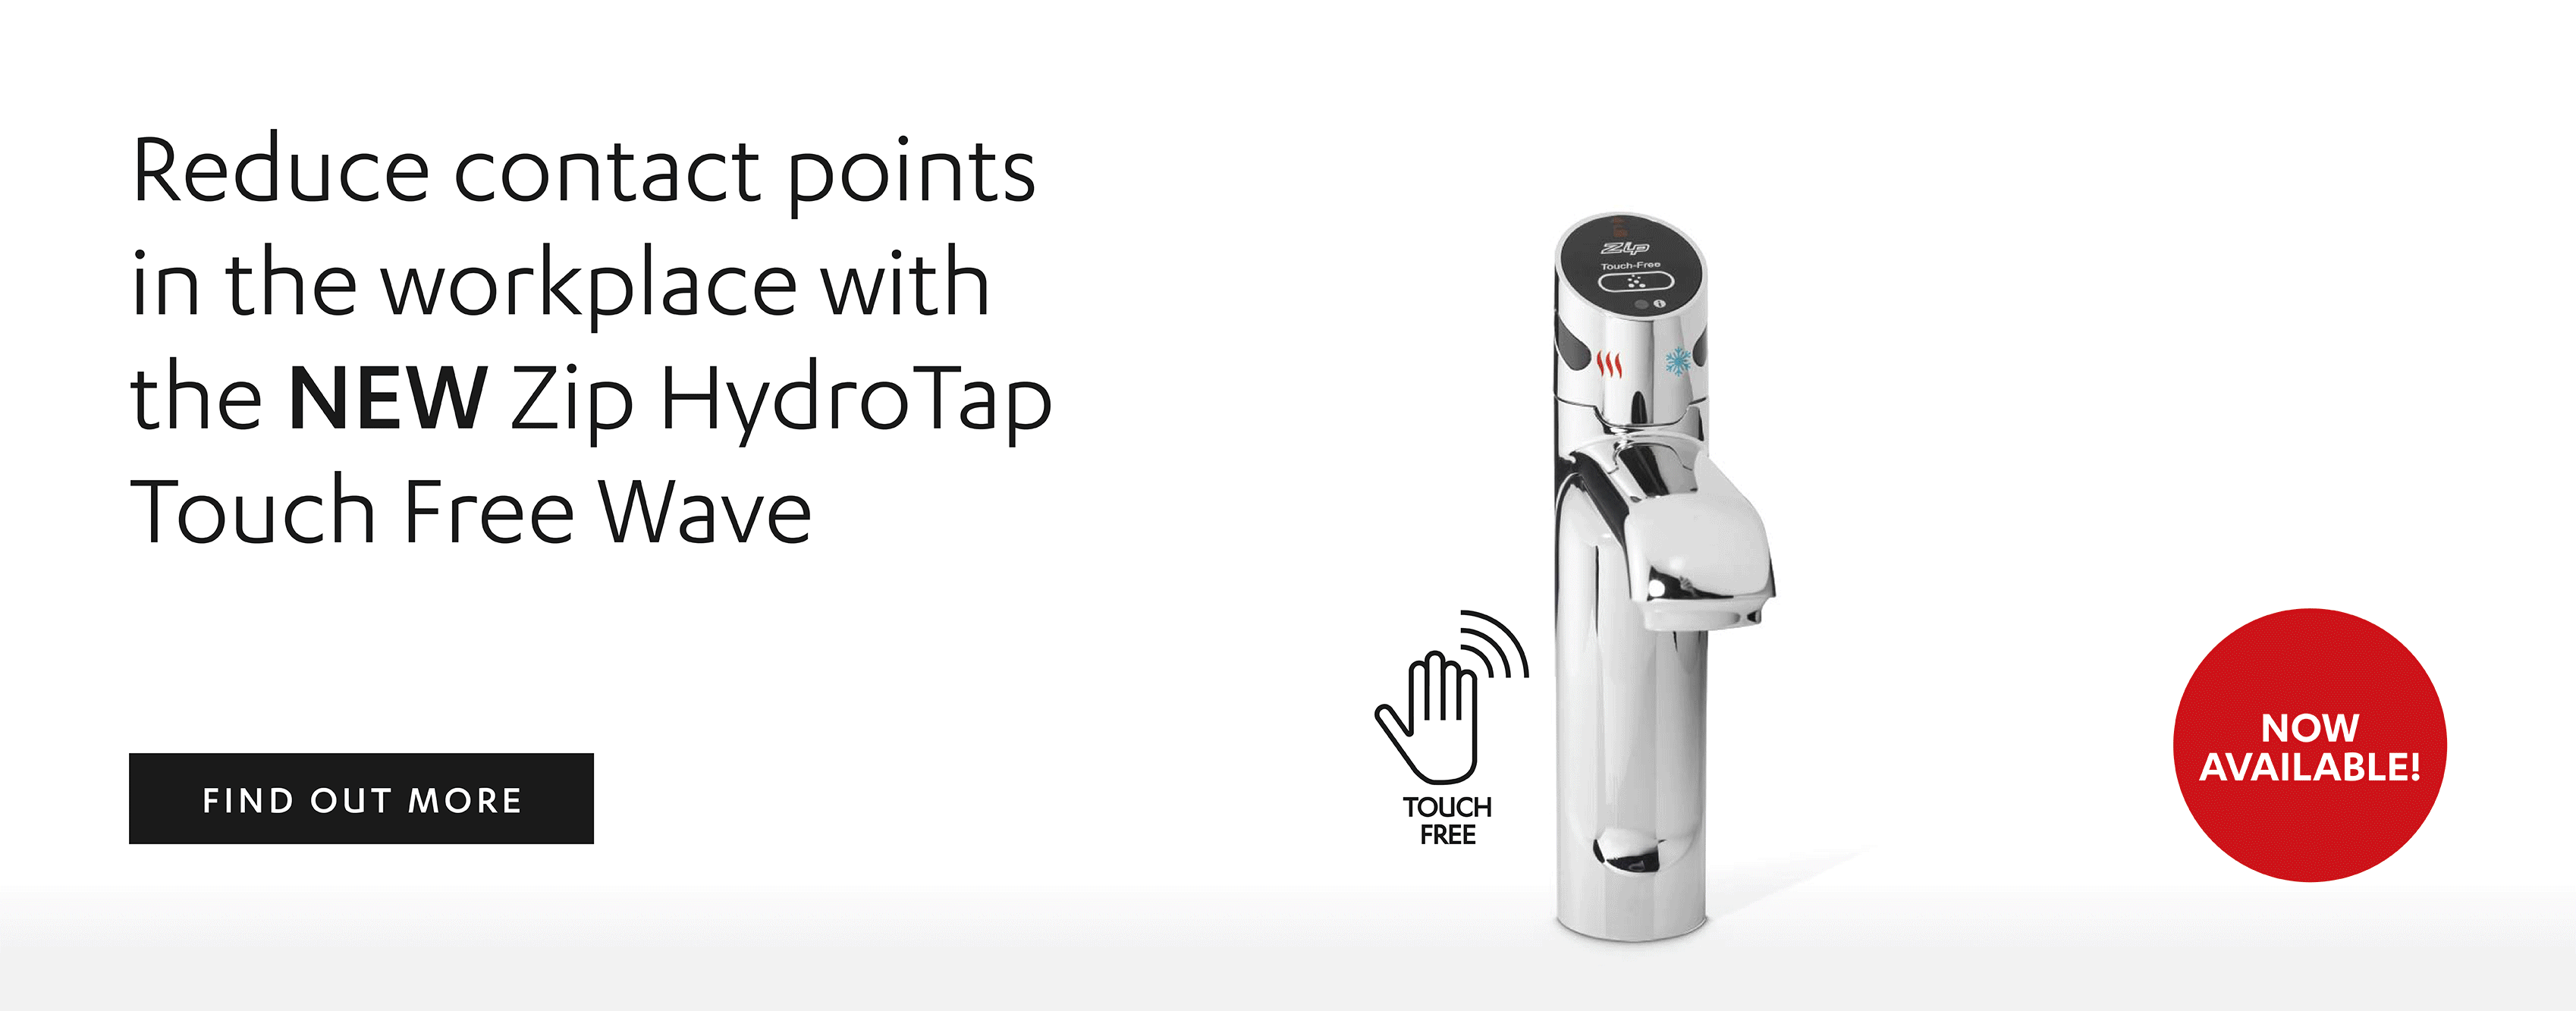 Zip HydroTap Touch Free Wave